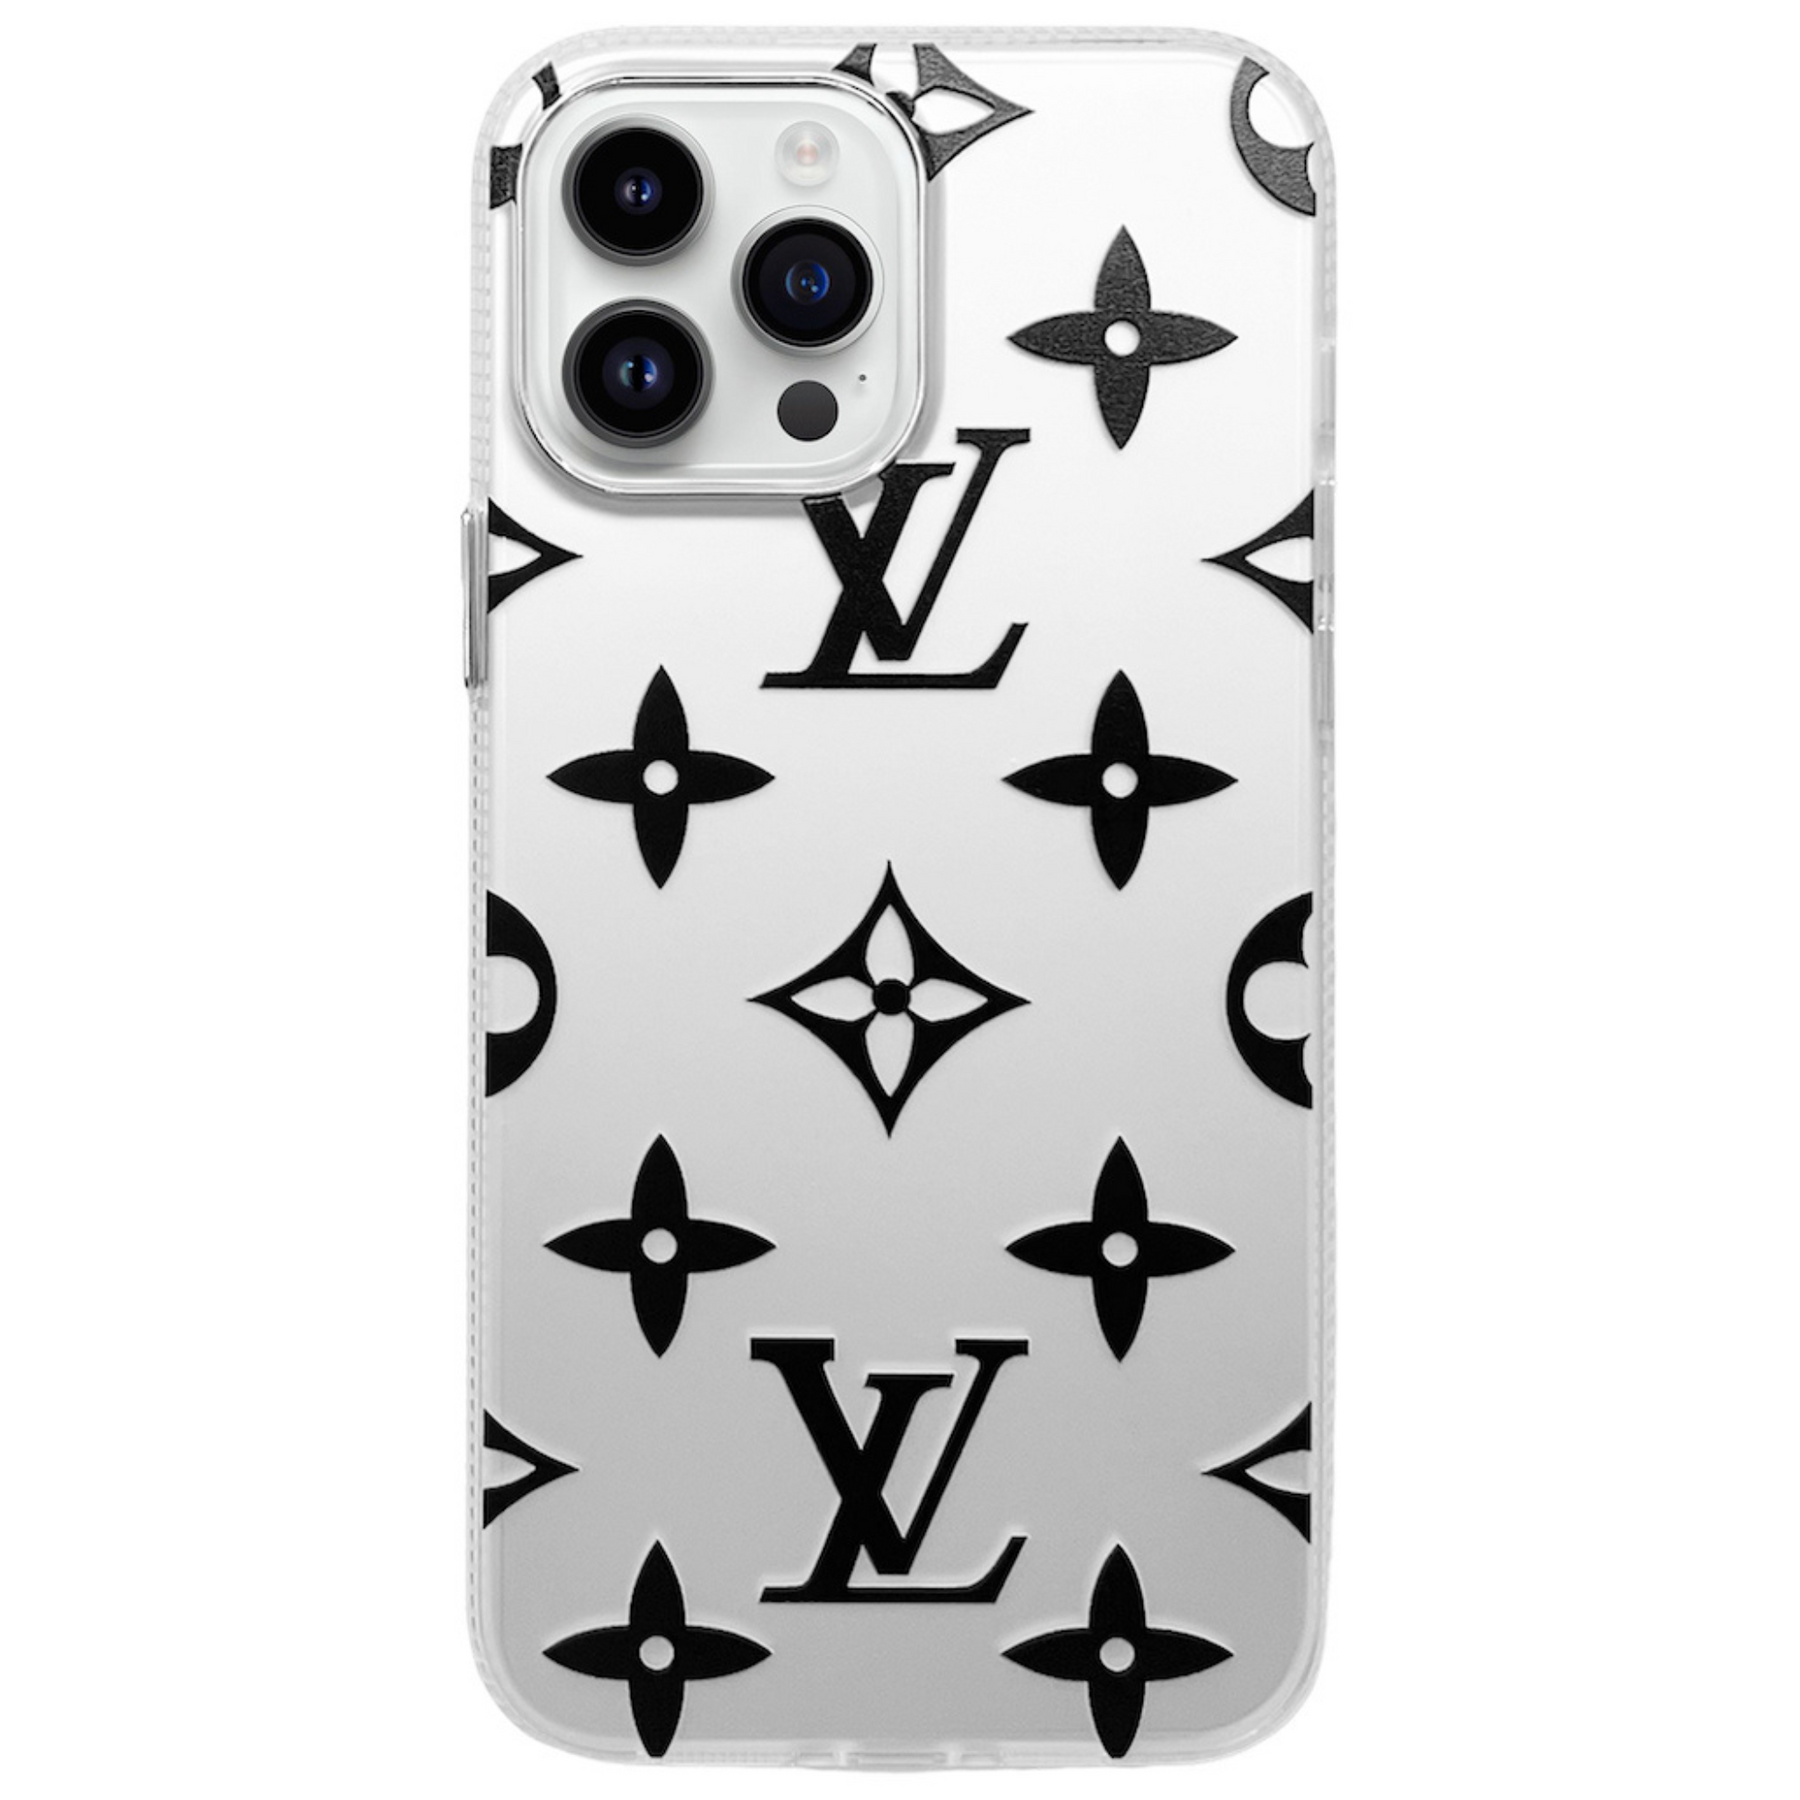 LV GLOSSY IPHONE CASES – Puffcase